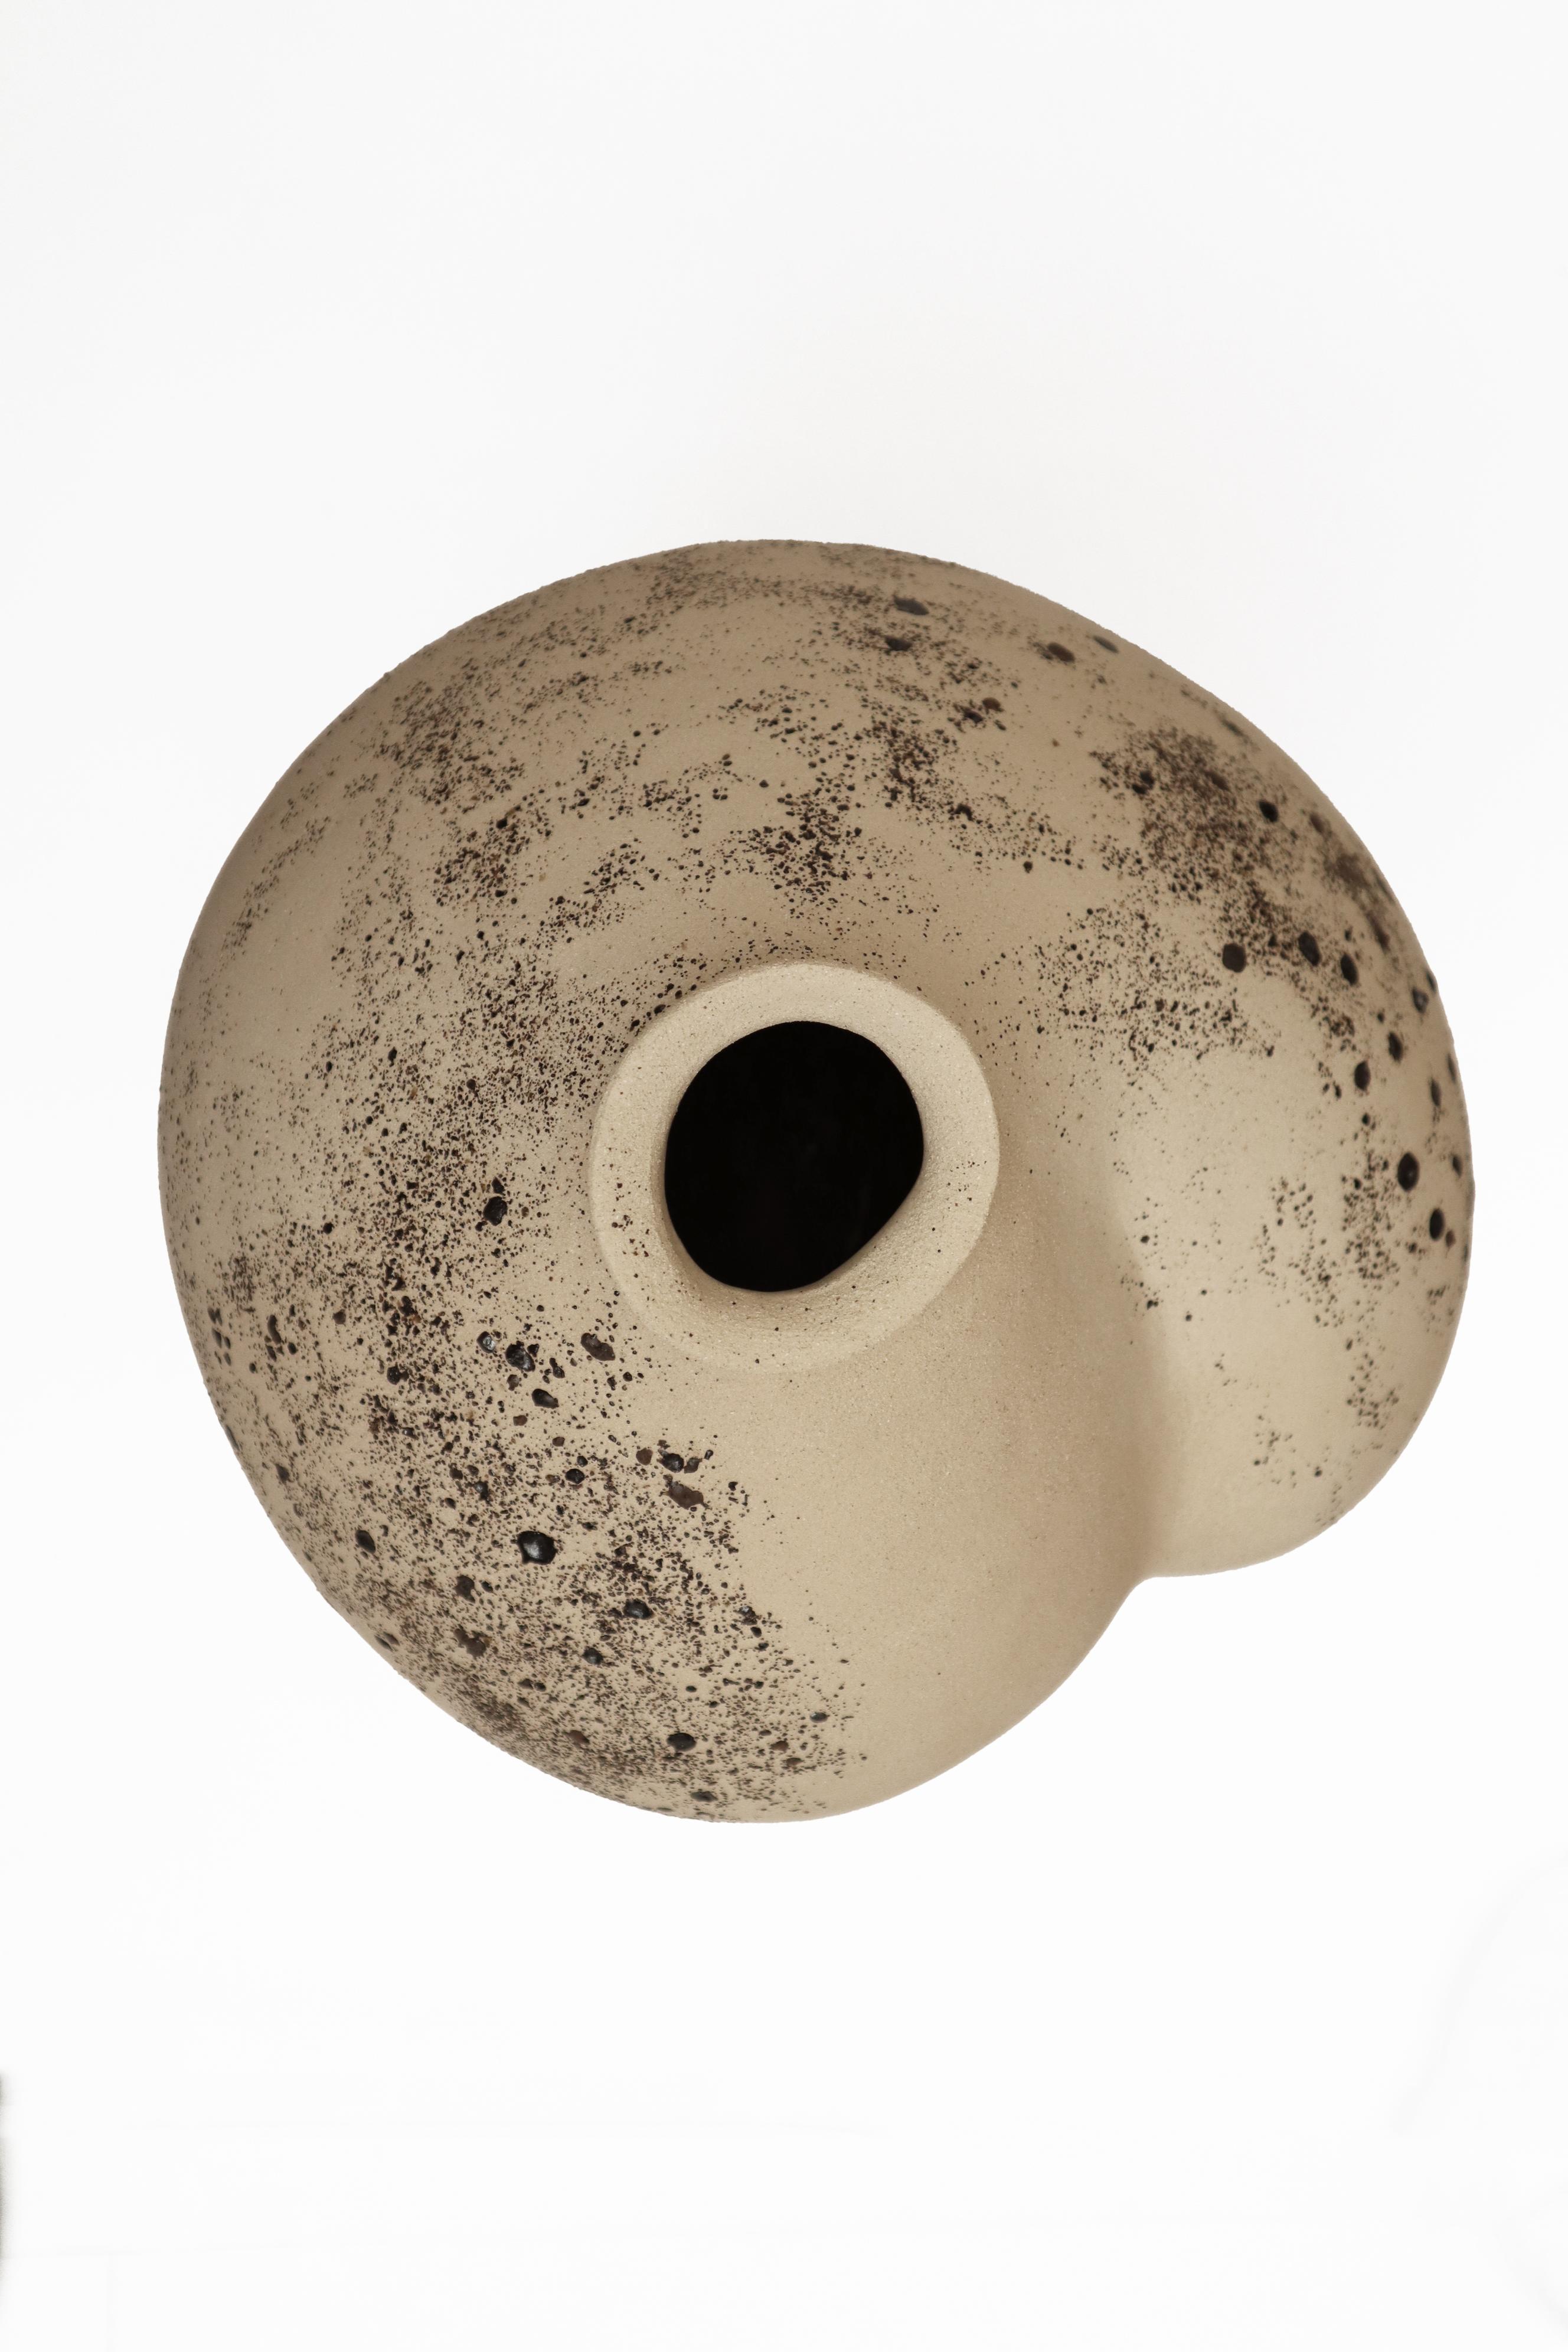 Stomata 13 vase by Anna Karountzou
Dimensions: W 32 x D 31 x H 45 cm
Materials: White stoneware clay, clear glaze inside, decorated outside with volcano rocks collected from Santorini, fired at 1240

Born and based in Athens, Greece, with a